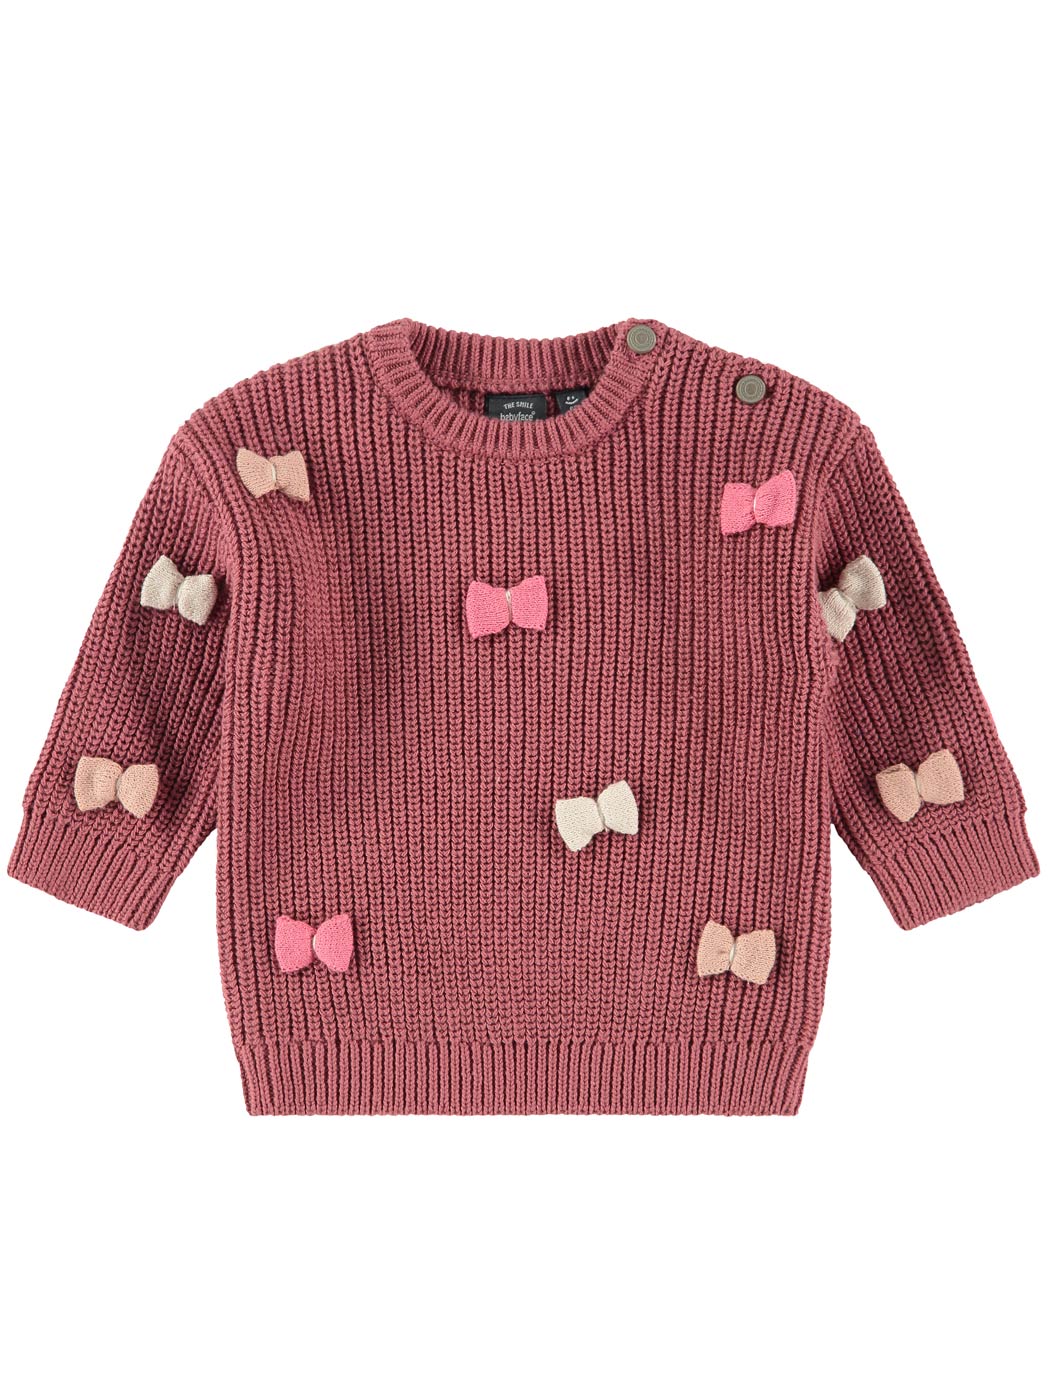 Babyface - Baby Girls pullover - NWB23628340 Pink